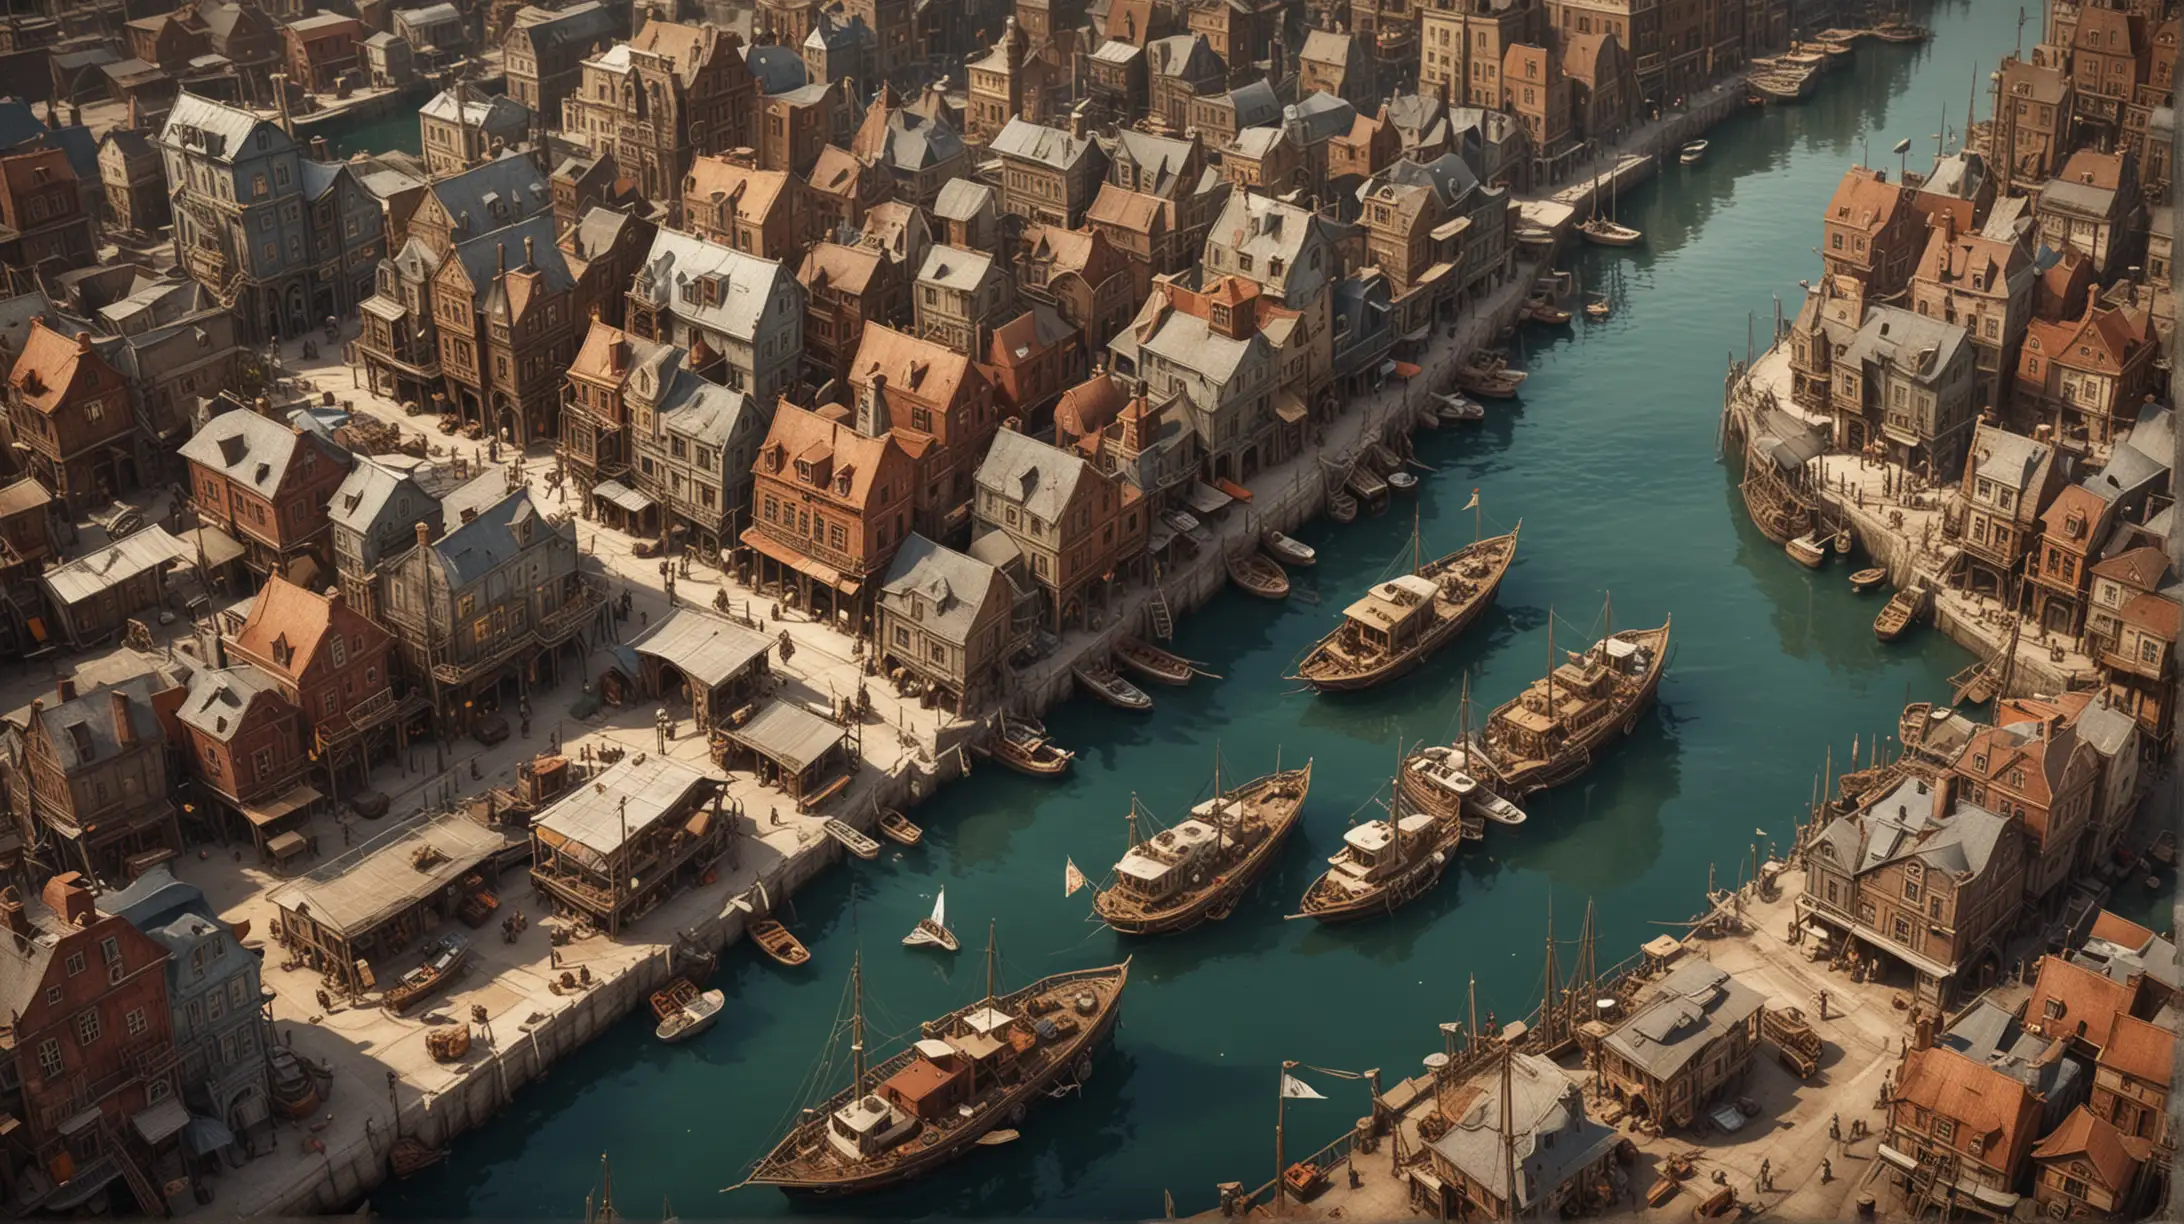 an old  steampunk city with many channels, boats, small harbors, bird's eye view